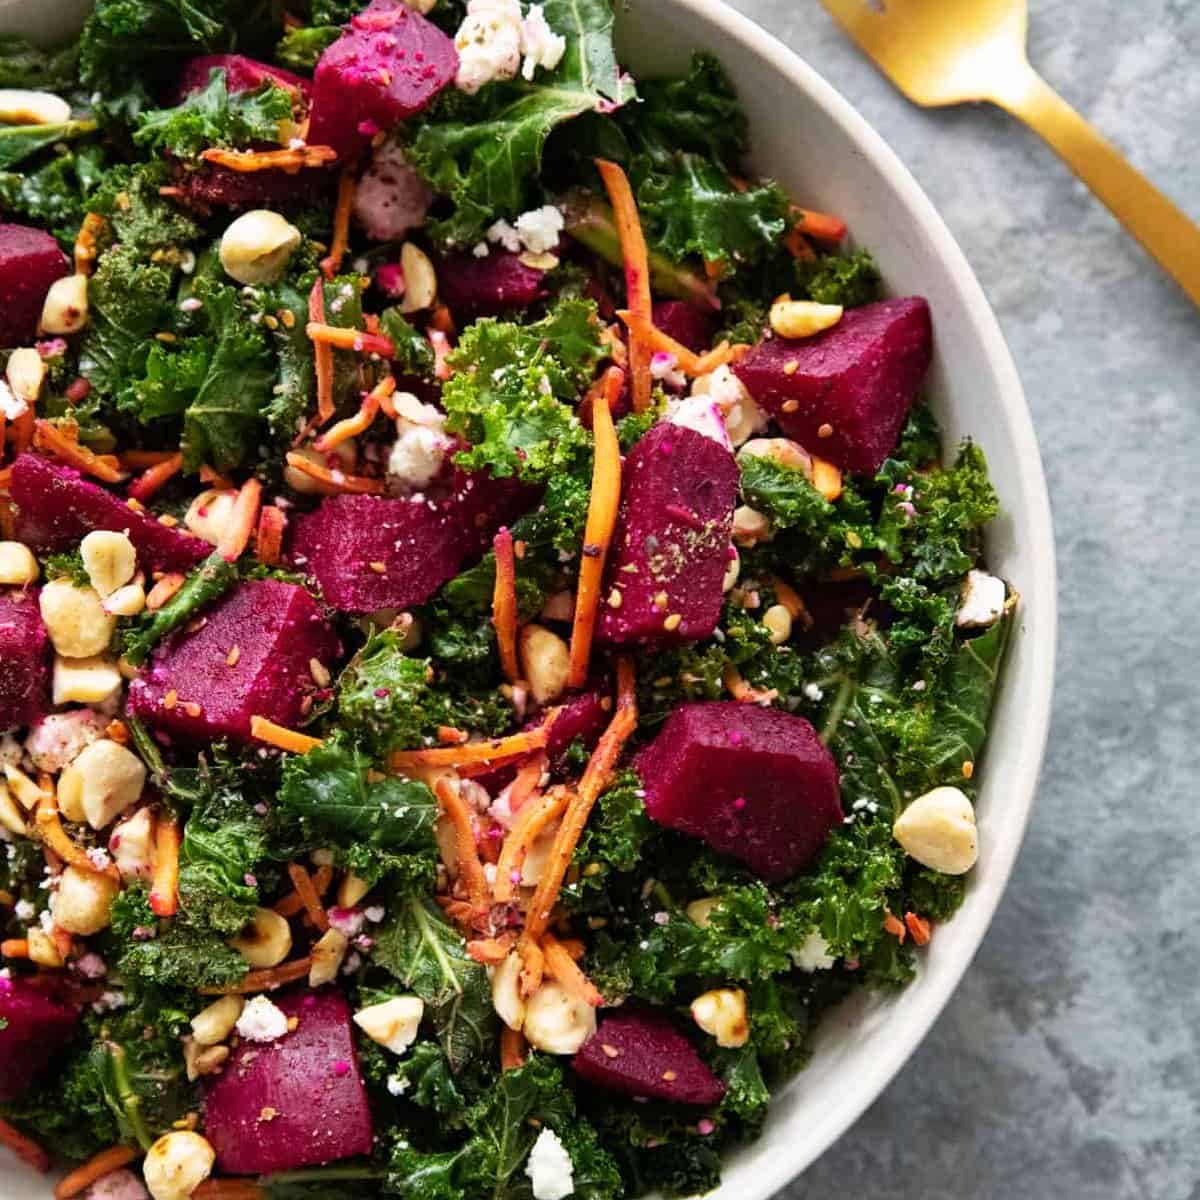 This beet salad is colorful and so easy to make. The addition of feta and zaatar makes this salad a delicious choice, perfect for any gathering.
